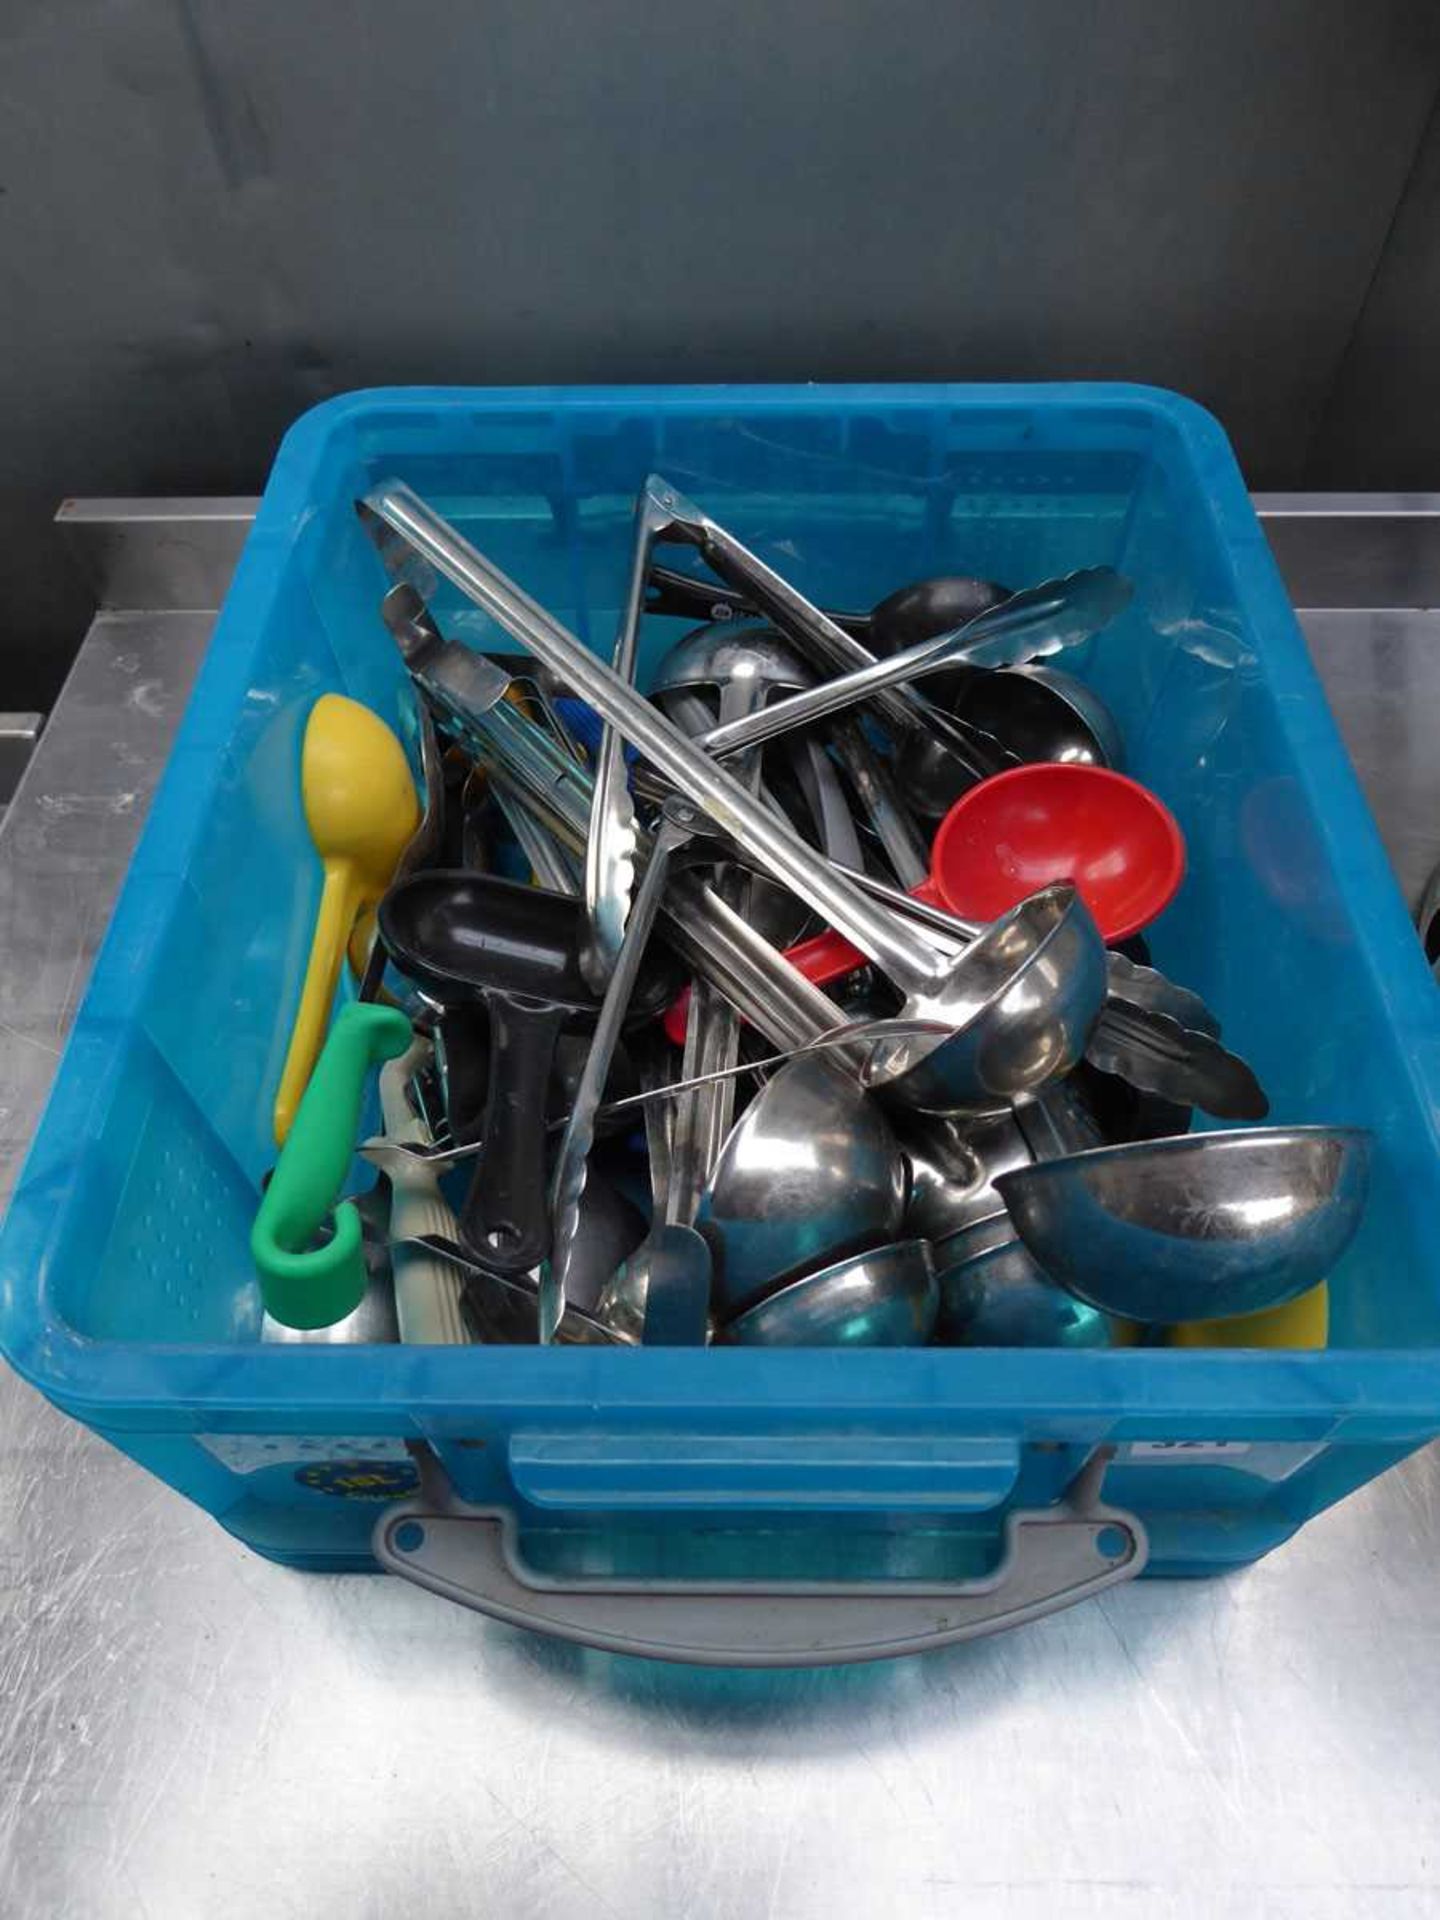 Tray of assorted chef's utensils